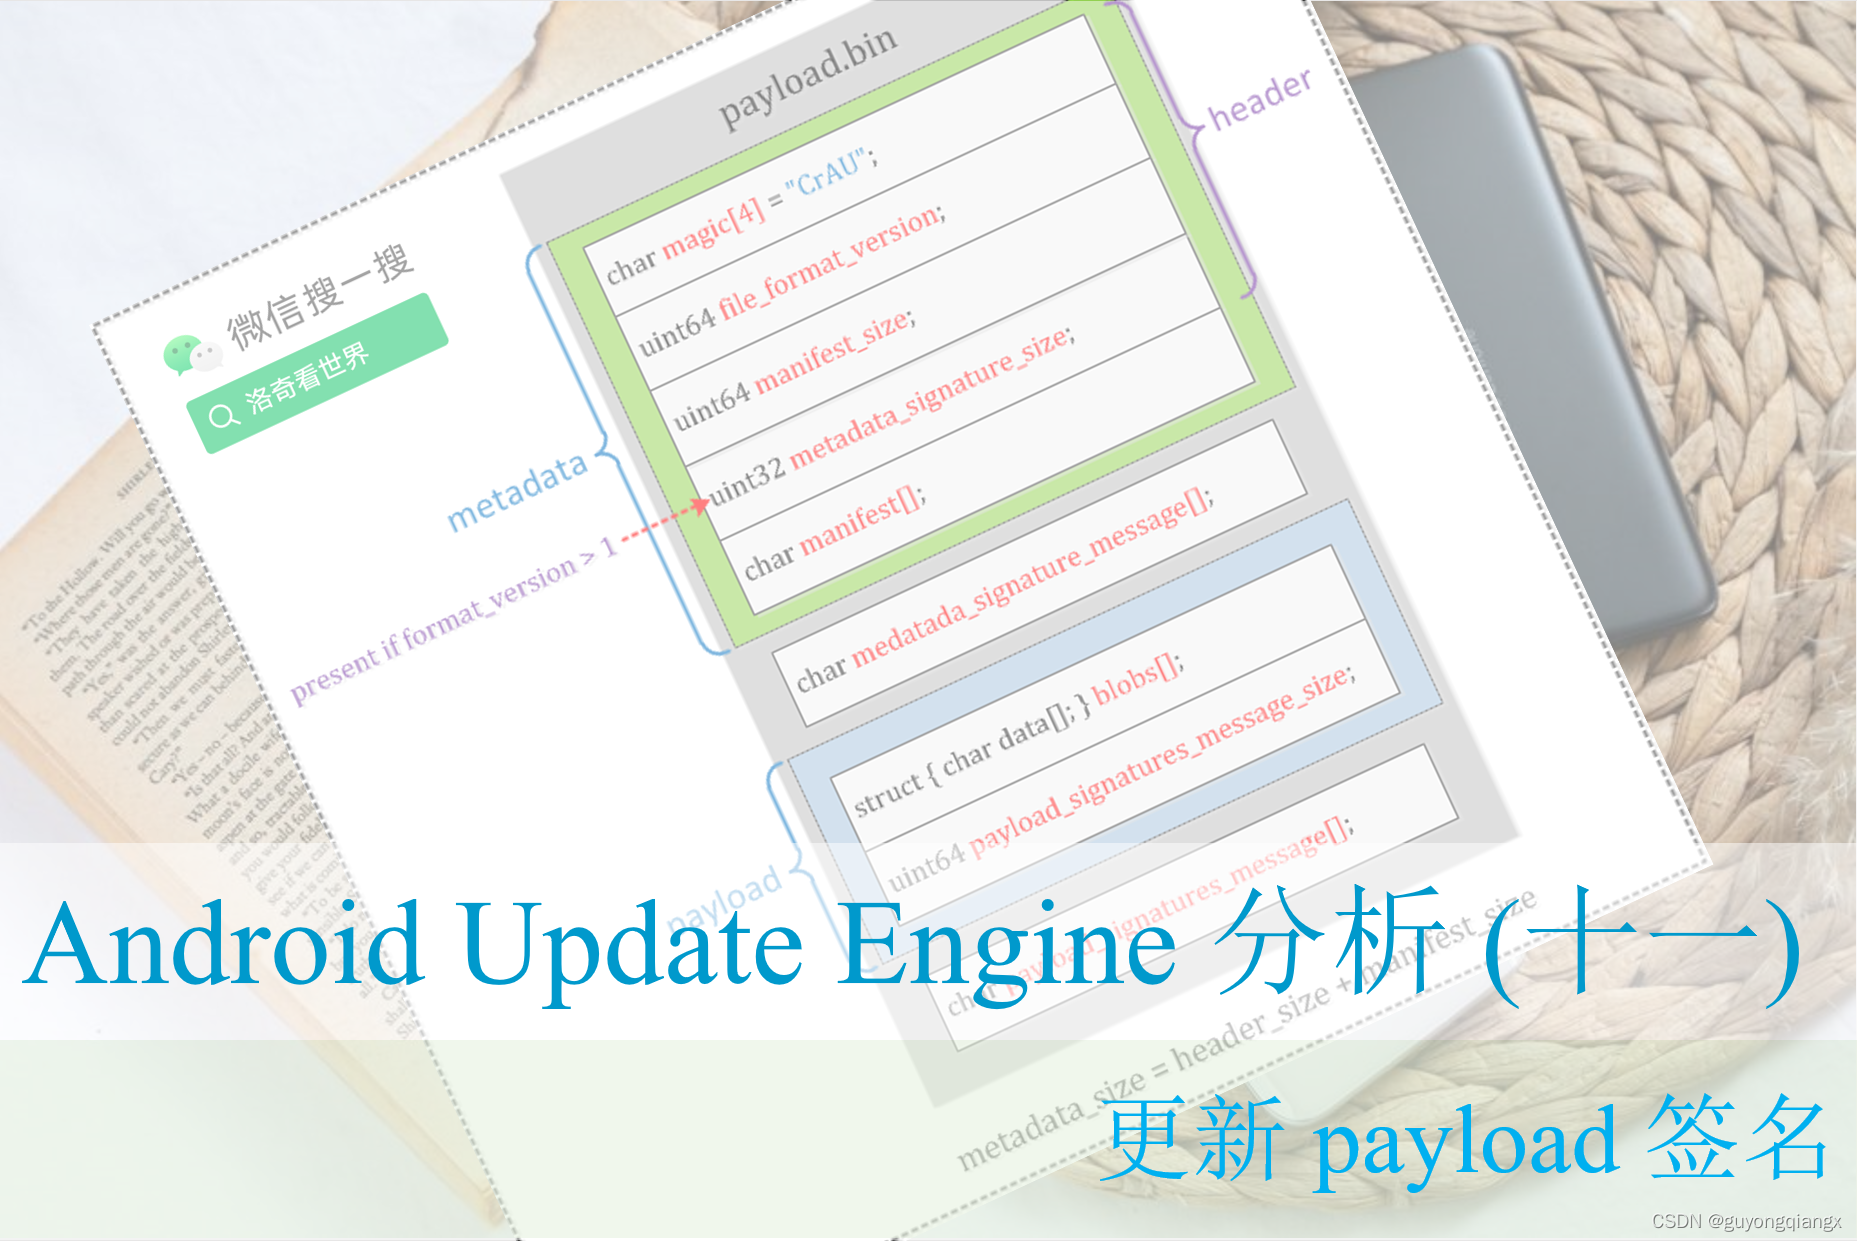 Android Update Engine分析（十一） 更新 payload 签名